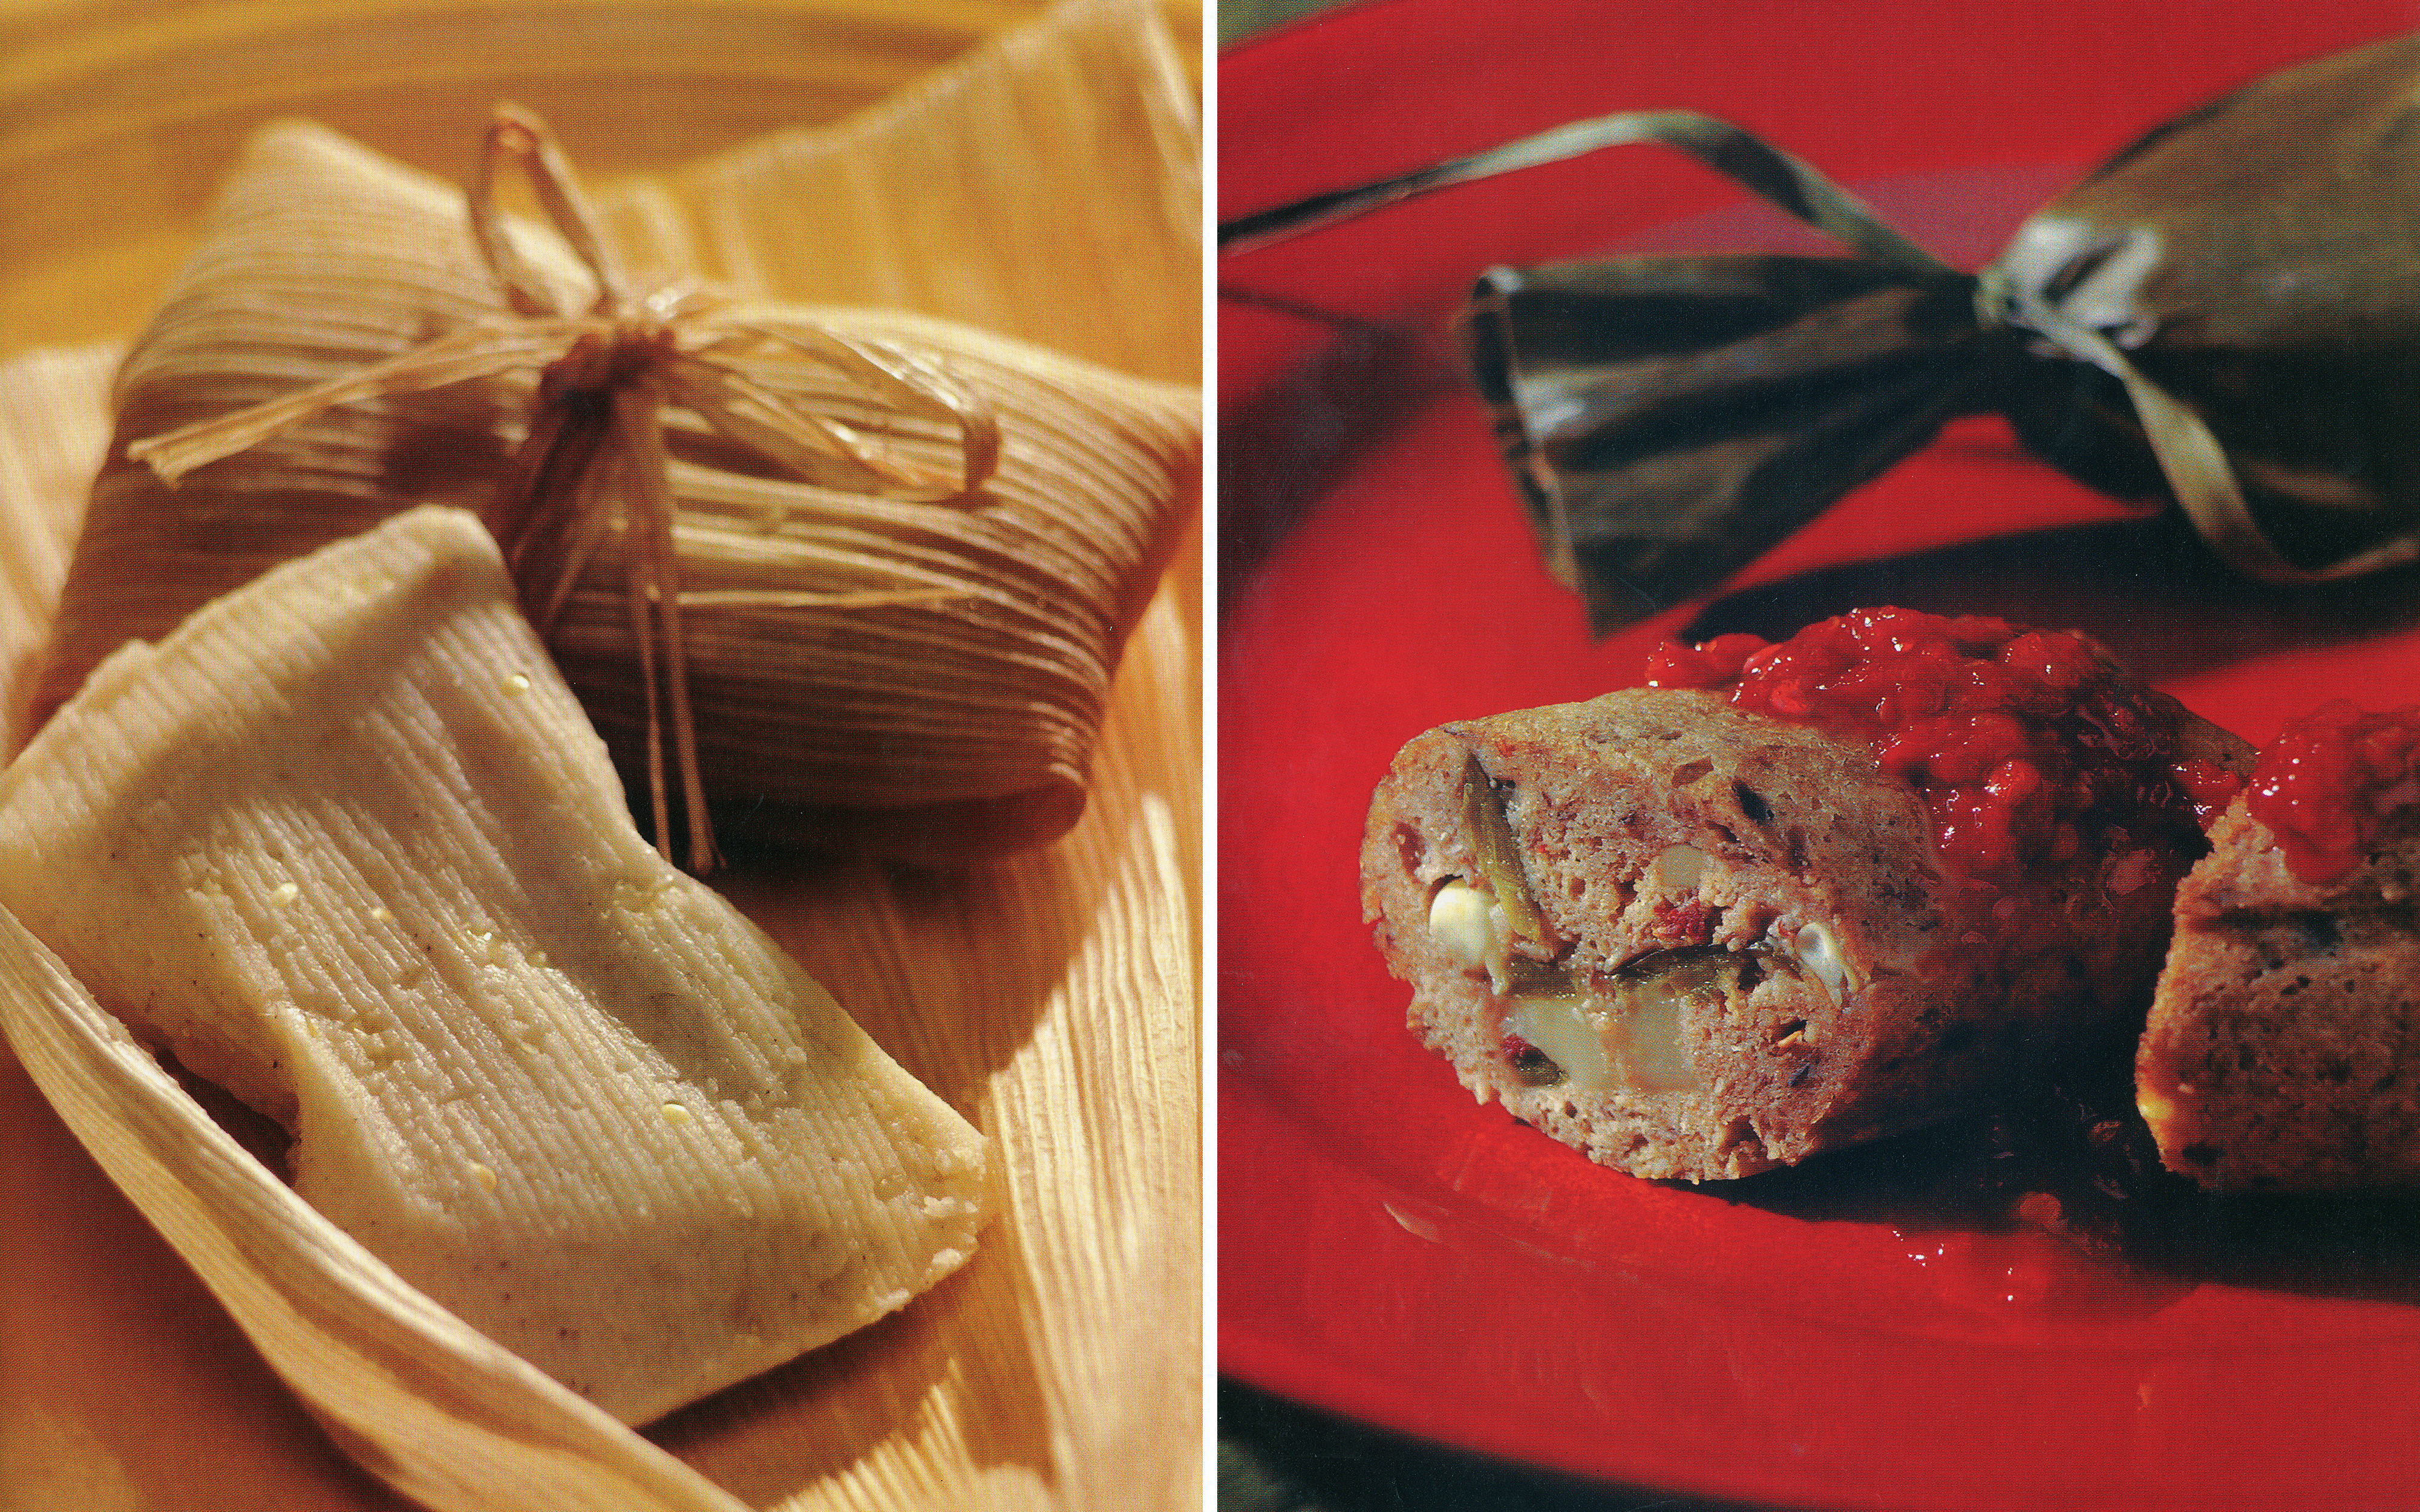 Right: Corn-and-poblano tamales, steamed in banana leaves and served with r...